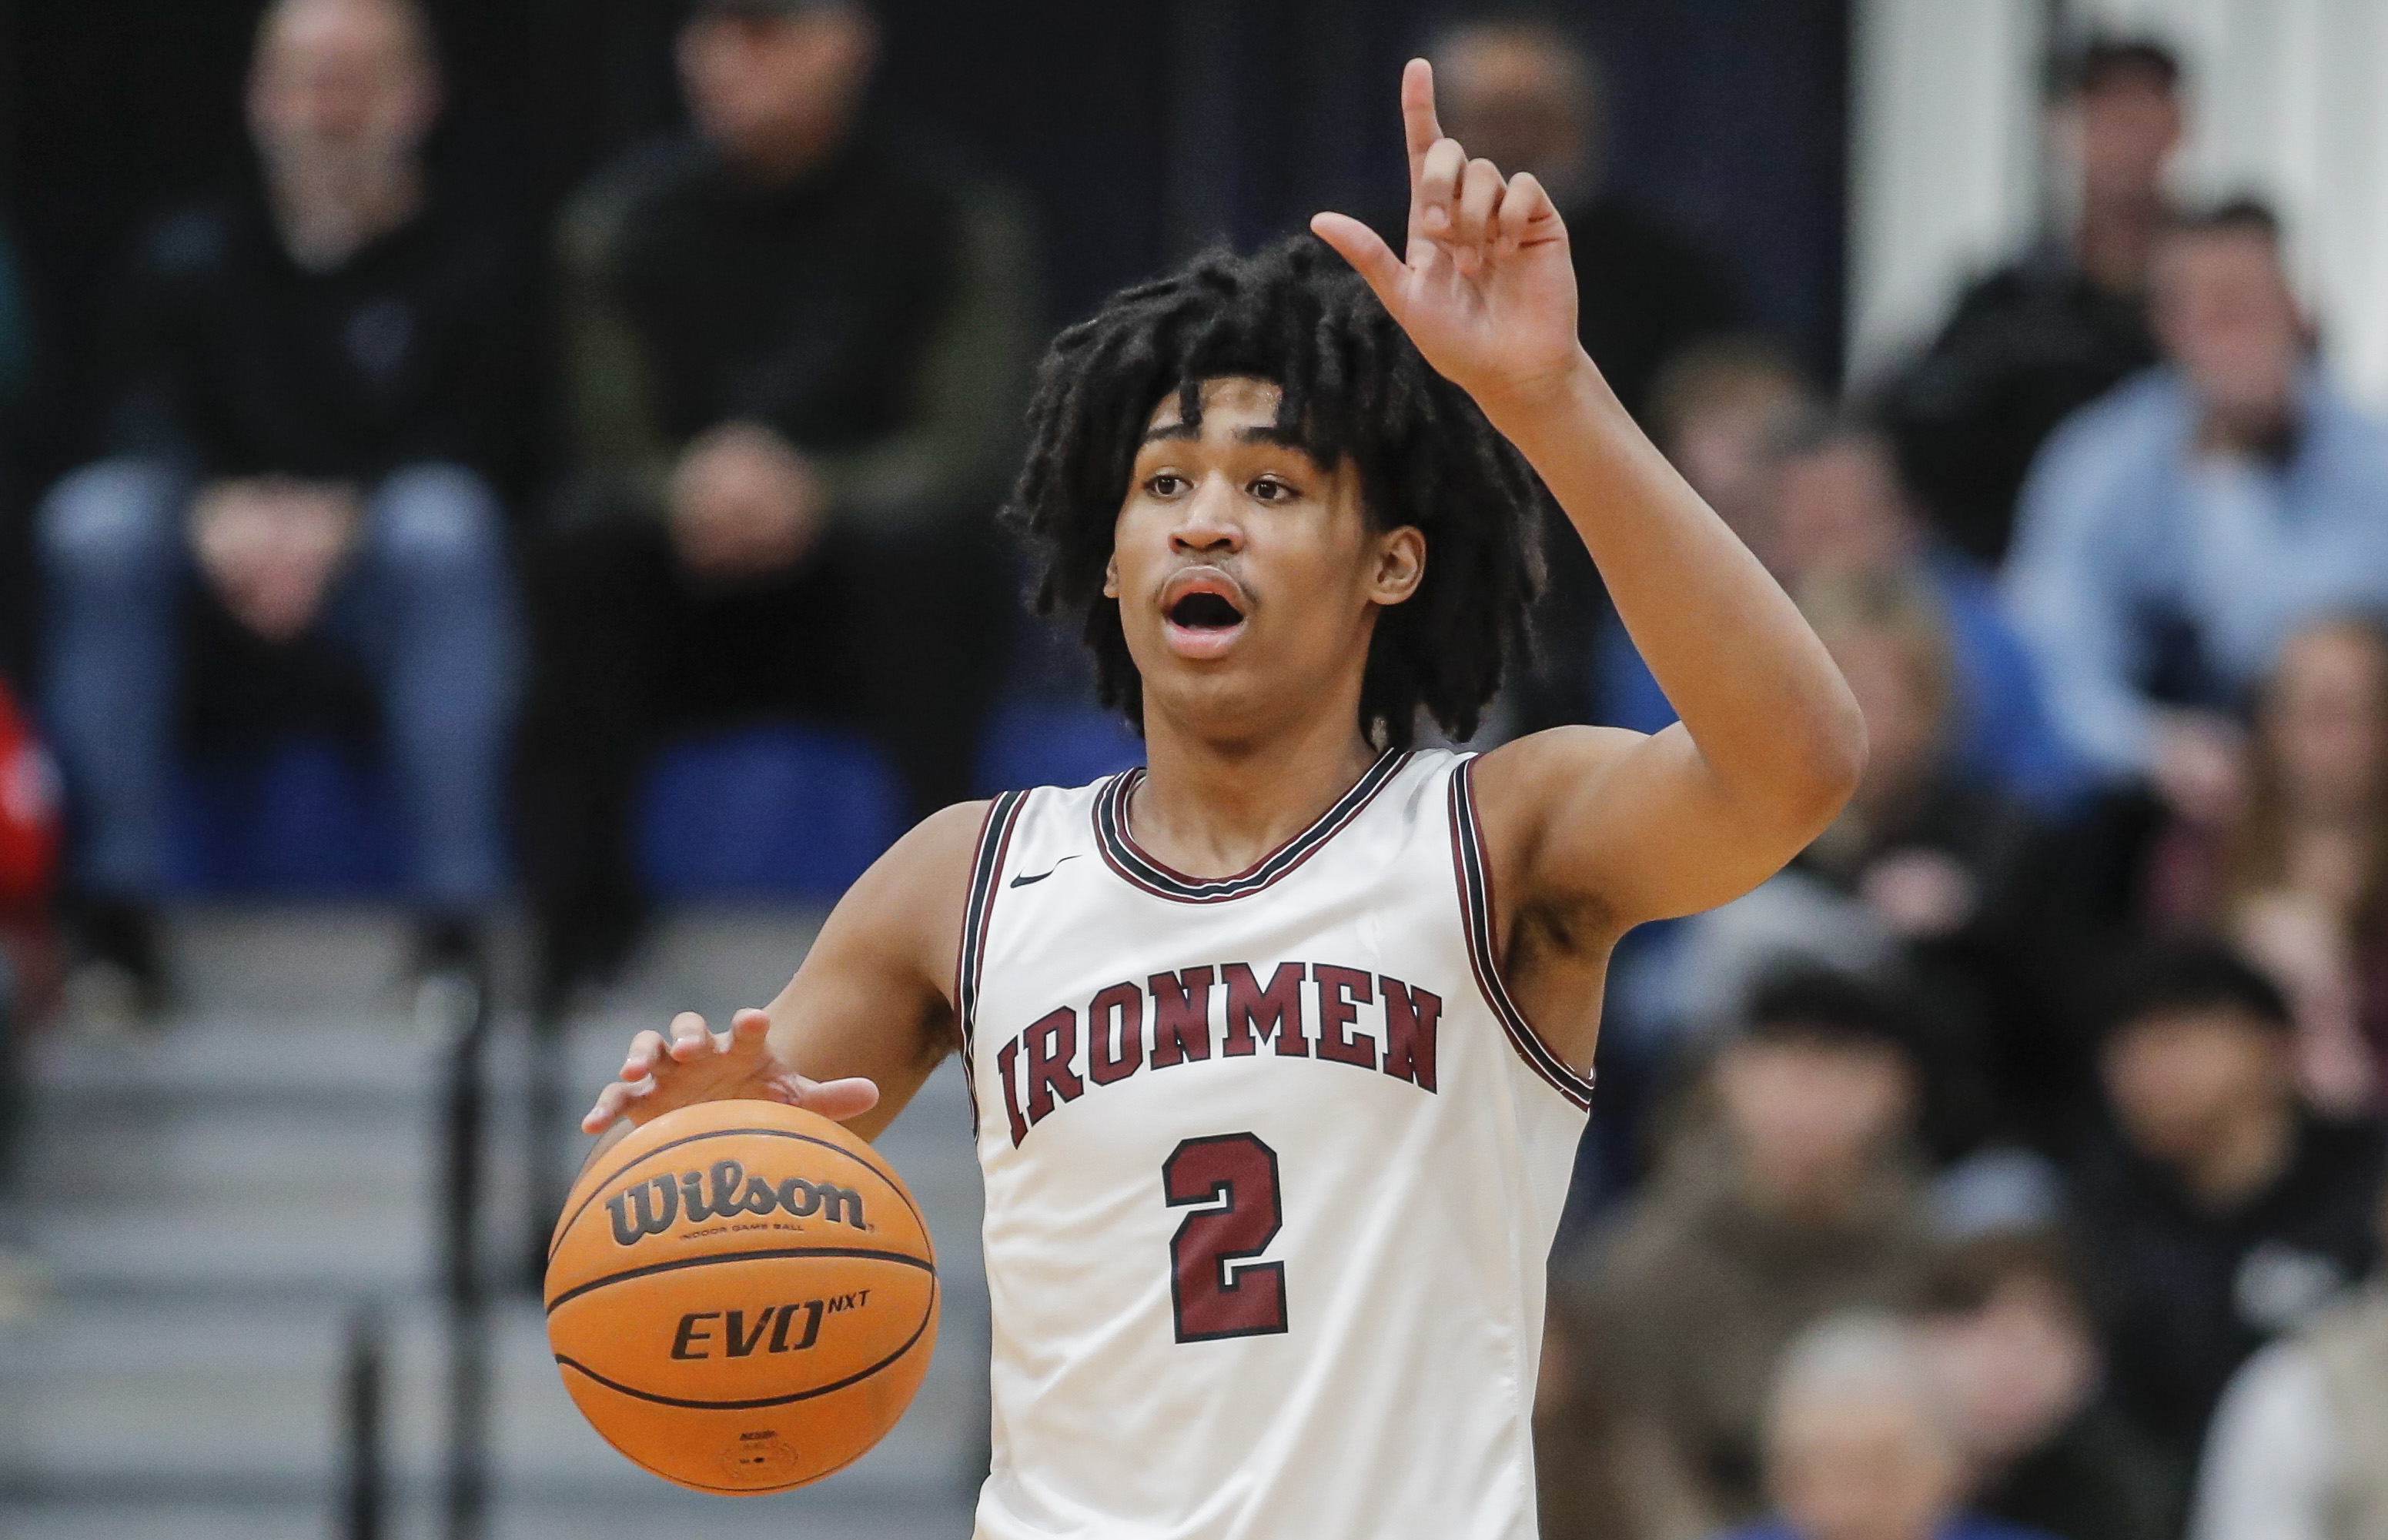 Dylan Harper: Top NJ basketball recruit does it all on the court